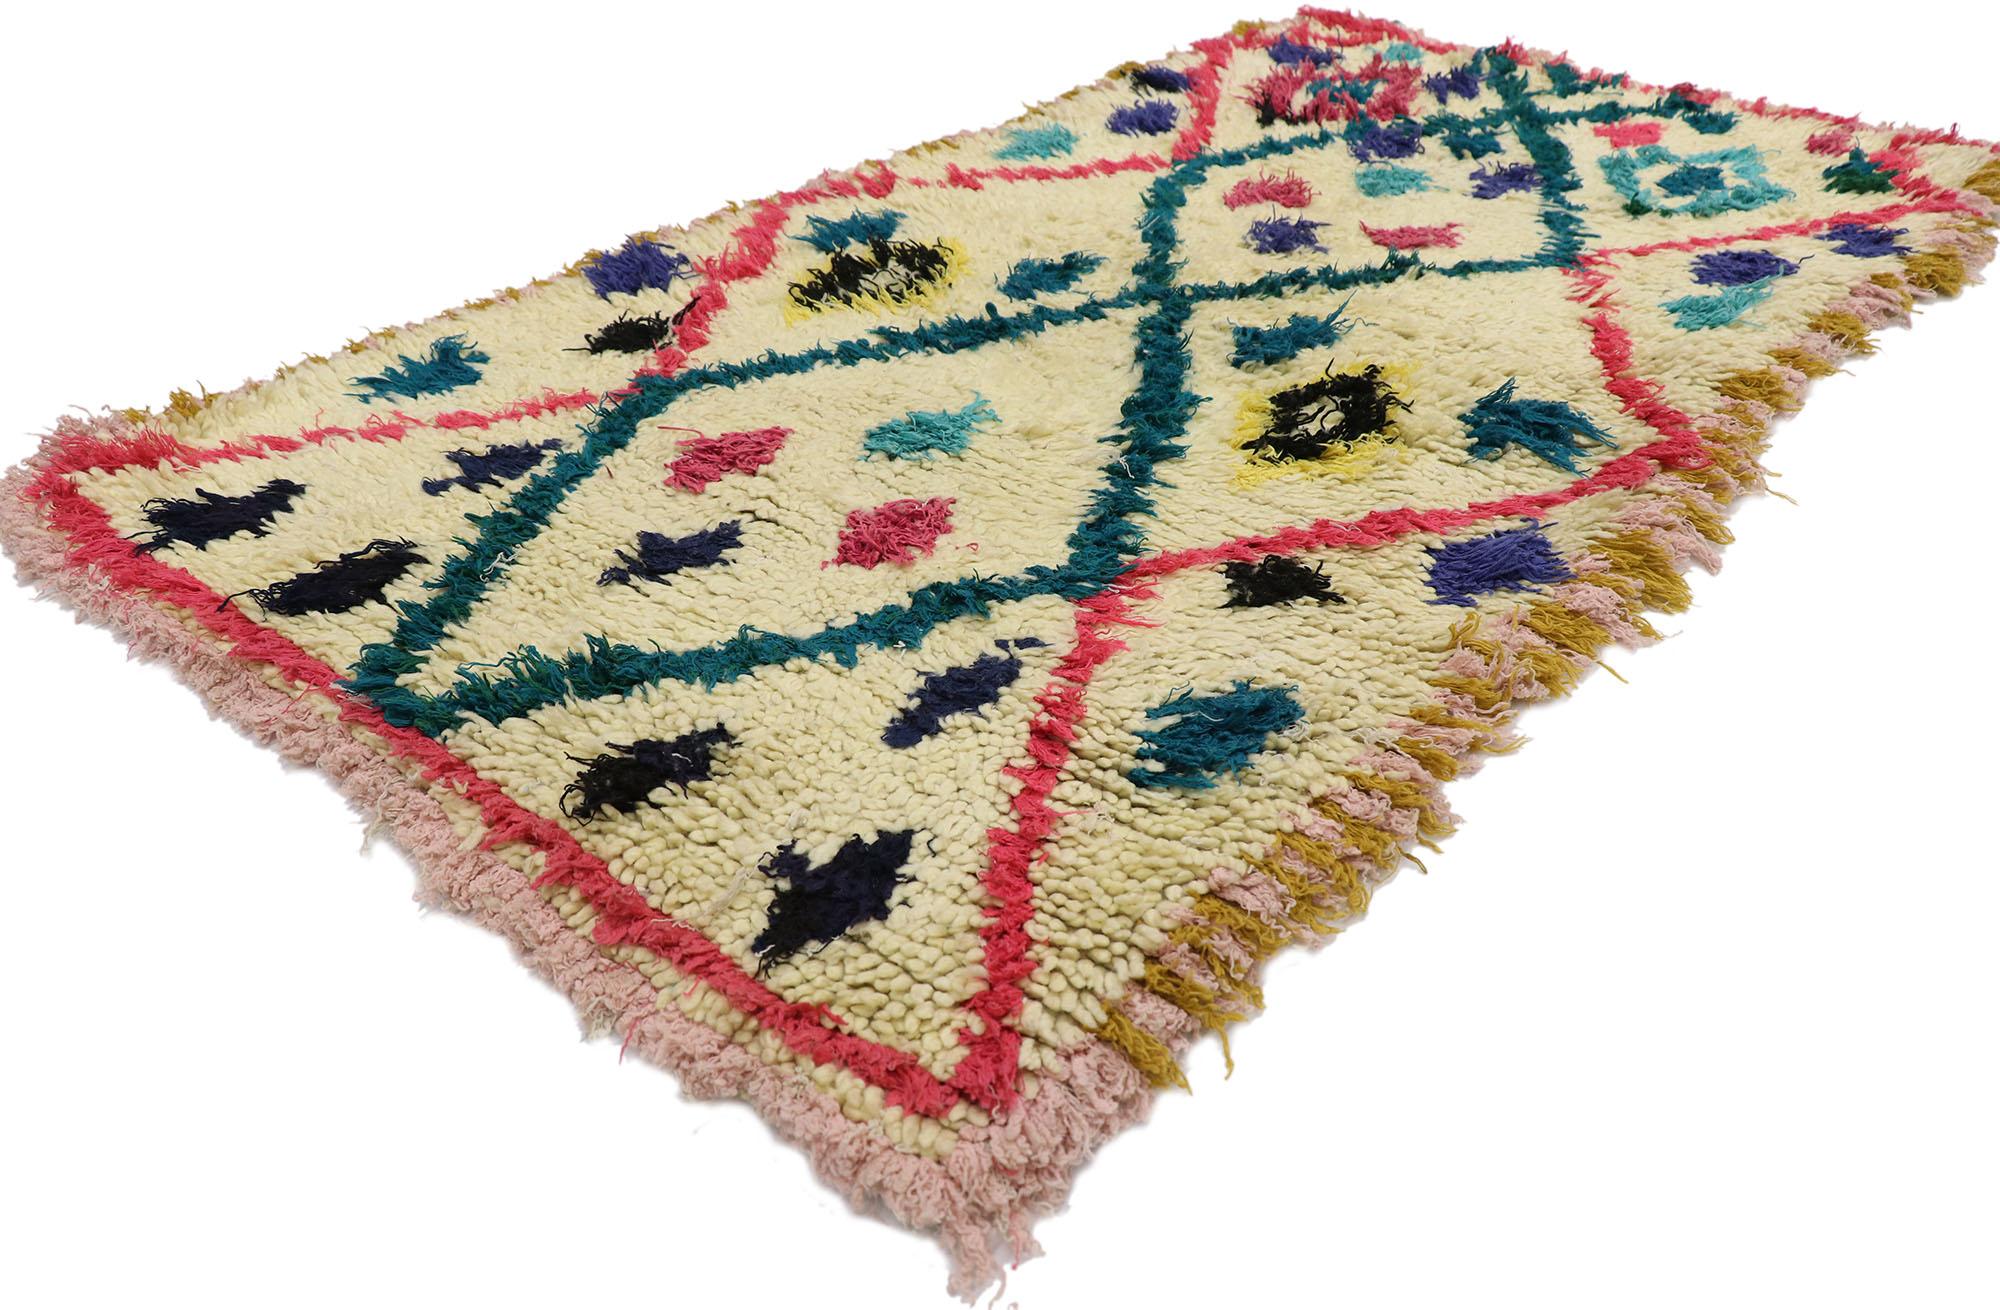 21596 Vintage Berber Moroccan Azilal Rug with Hygge Boho Chic Style 03'00 x 06'00. Showcasing a bold expressive design, incredible detail and texture, this hand knotted cotton and wool vintage Berber Moroccan Azilal rug is a captivating vision of